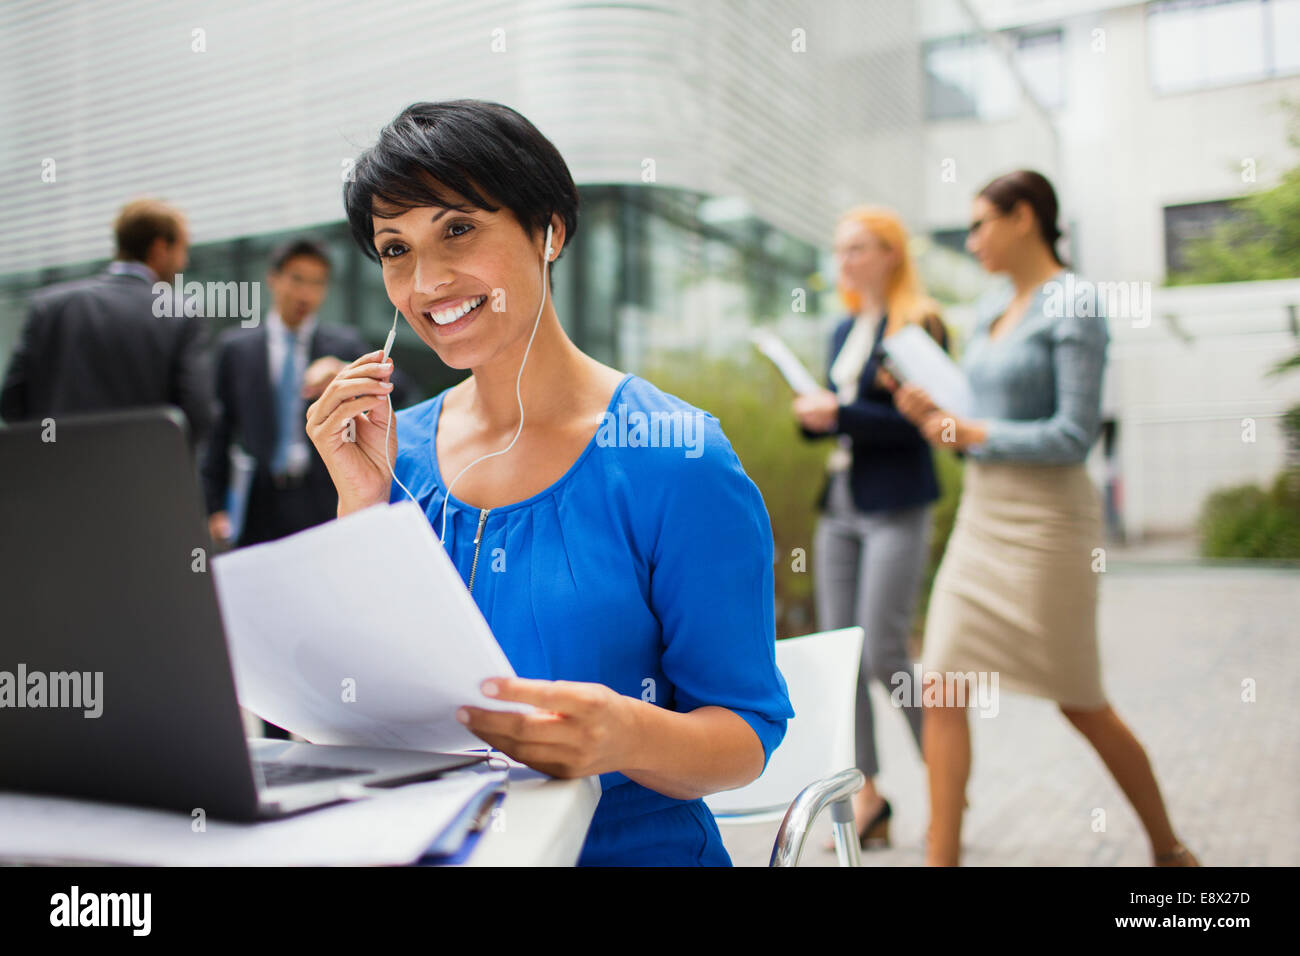 Businesswoman talking on headset at table in office building Stock Photo